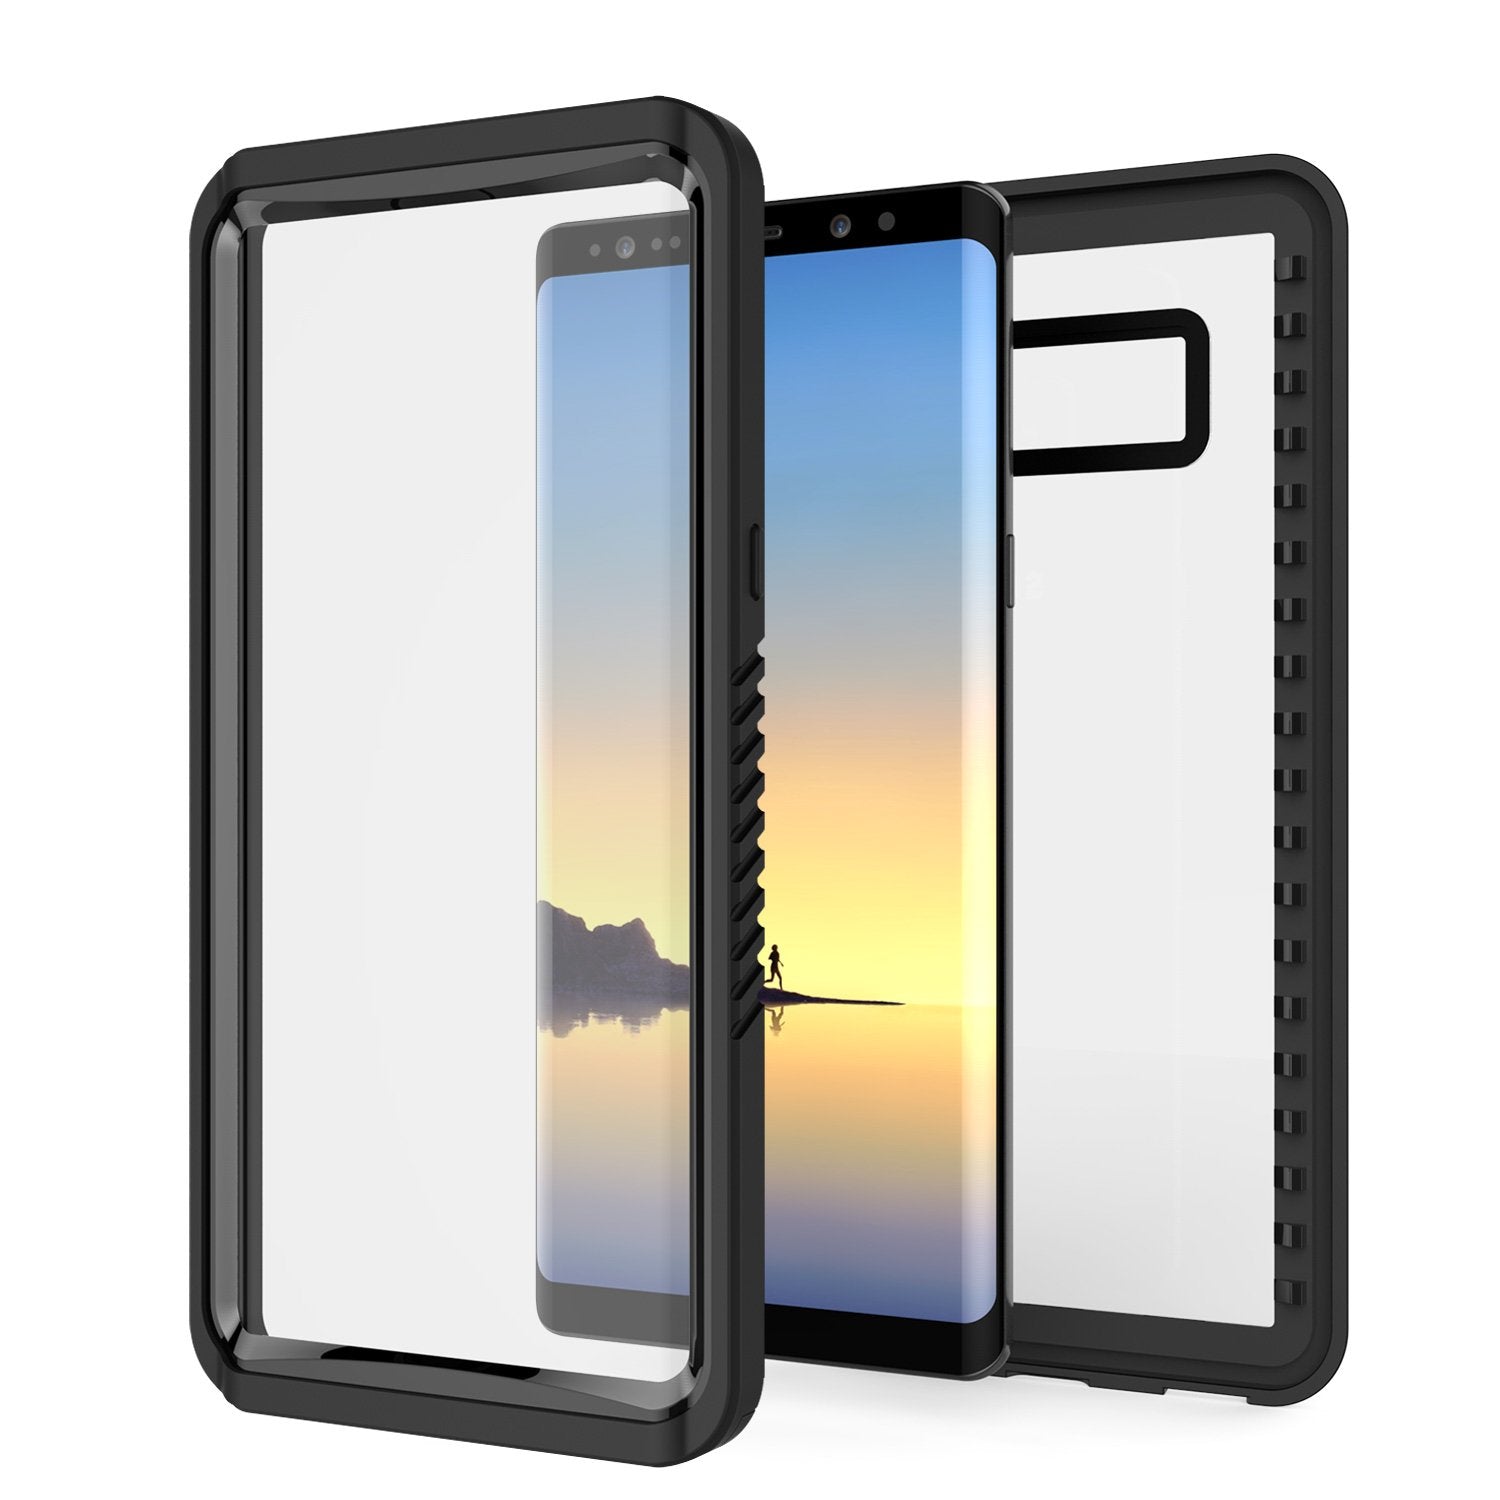 Galaxy Note 8 Case, Punkcase [Extreme Series] [Slim Fit] [IP68 Certified] [Shockproof] Armor Cover W/ Built In Screen Protector [Clear]